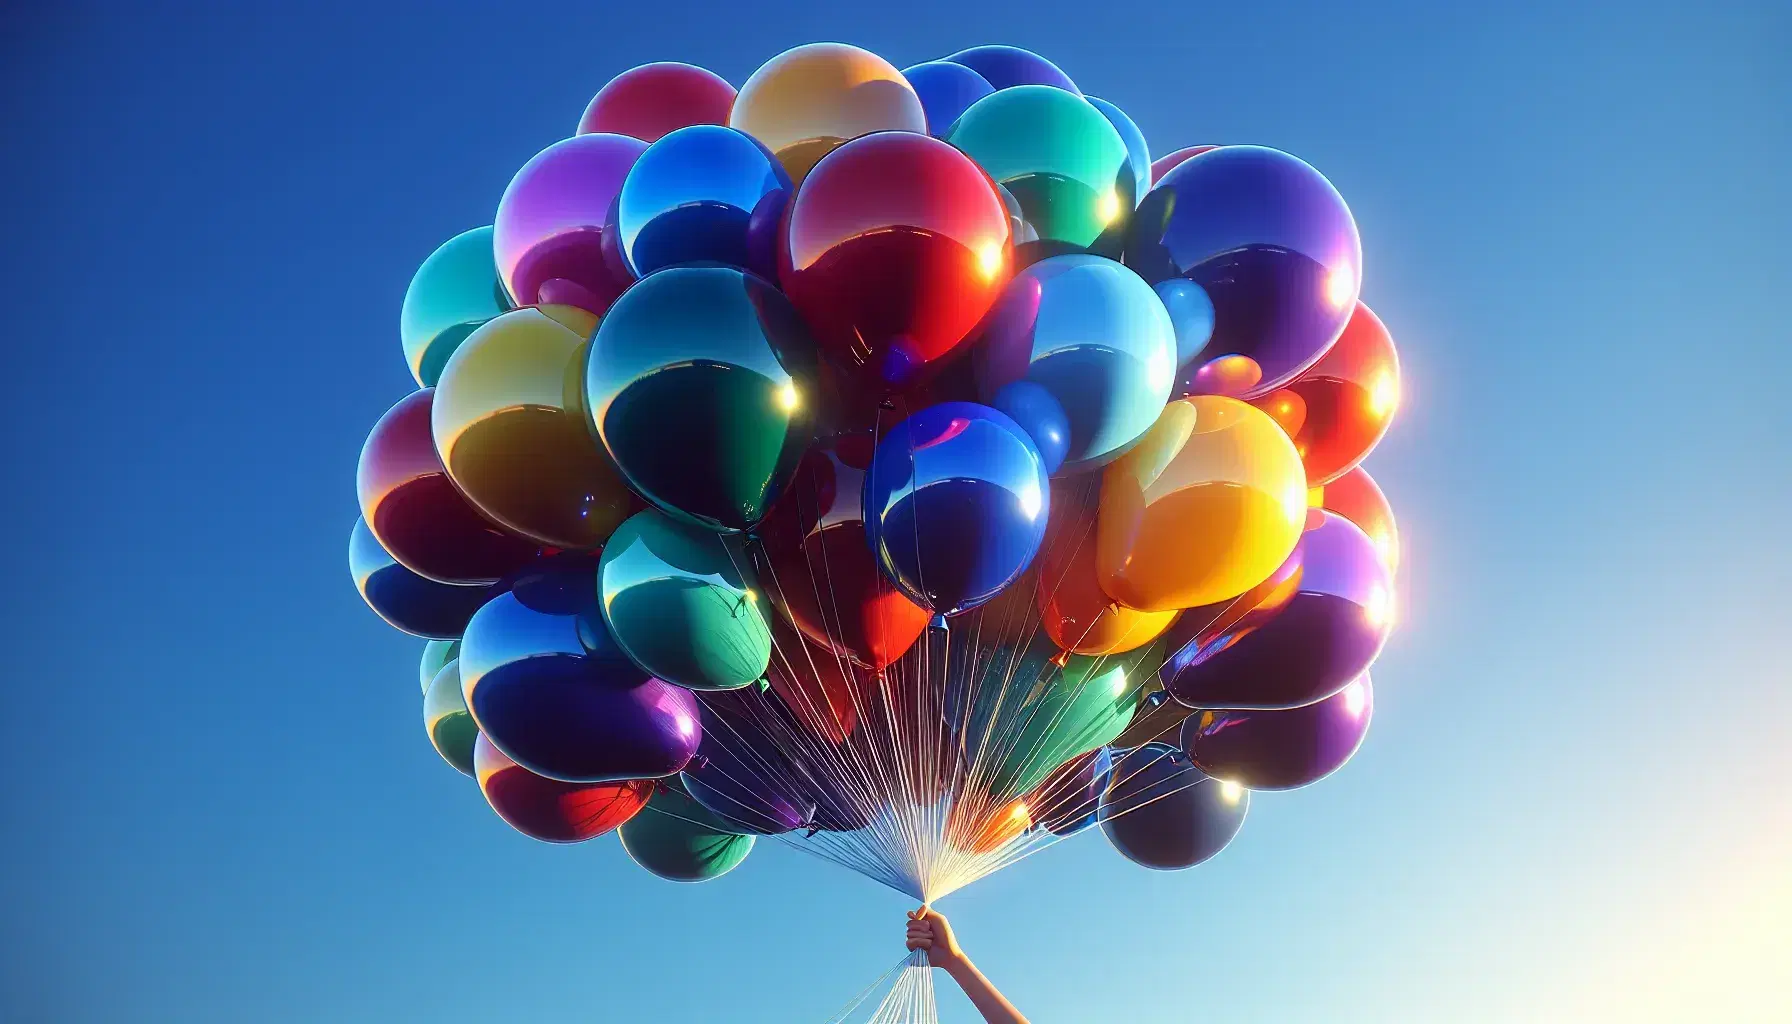 Group of inflated colorful balloons, tied together, float against a clear blue sky, reflecting sunlight.